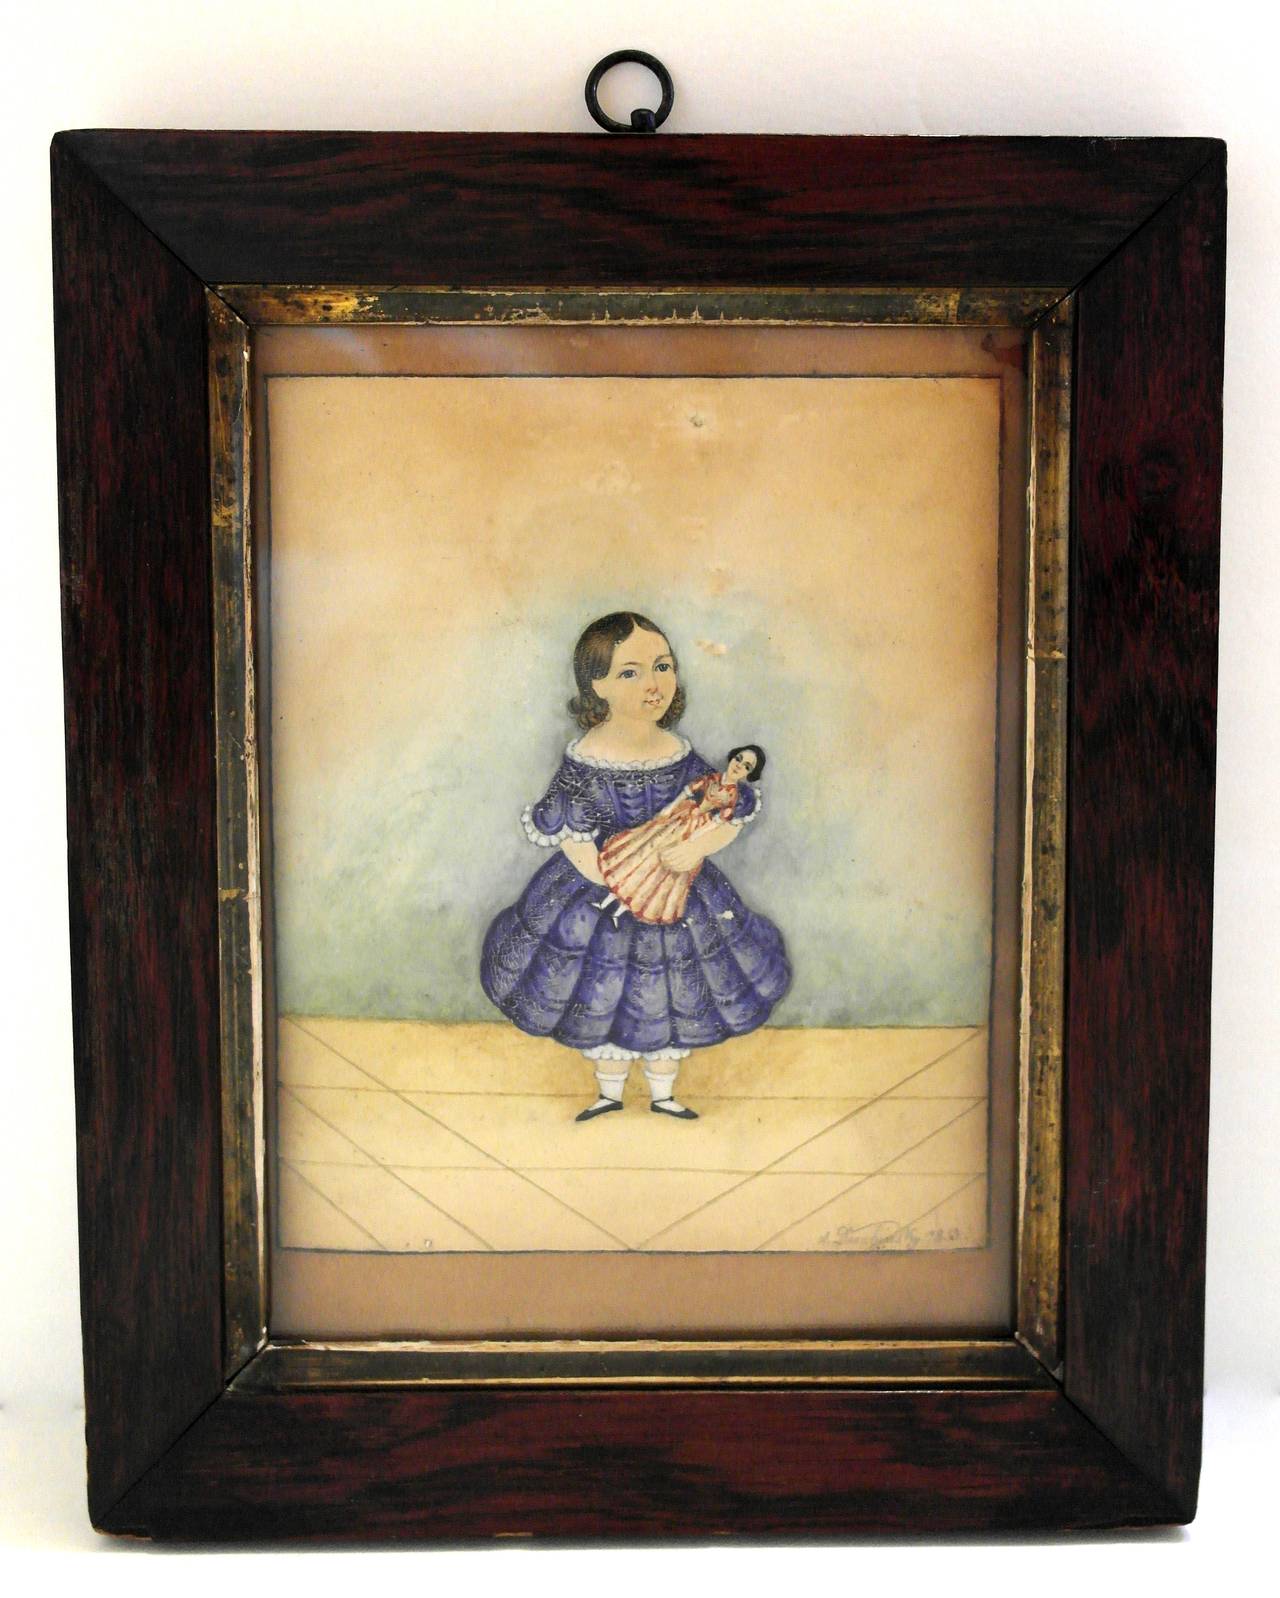 Being offered is a circa 1853 American Folk Art portrait of a young girl in a blue dress. Rare early example with artist using pencil, watercolor and oil, all rendered on paper. Young girl standing while holding her favorite doll. A well executed